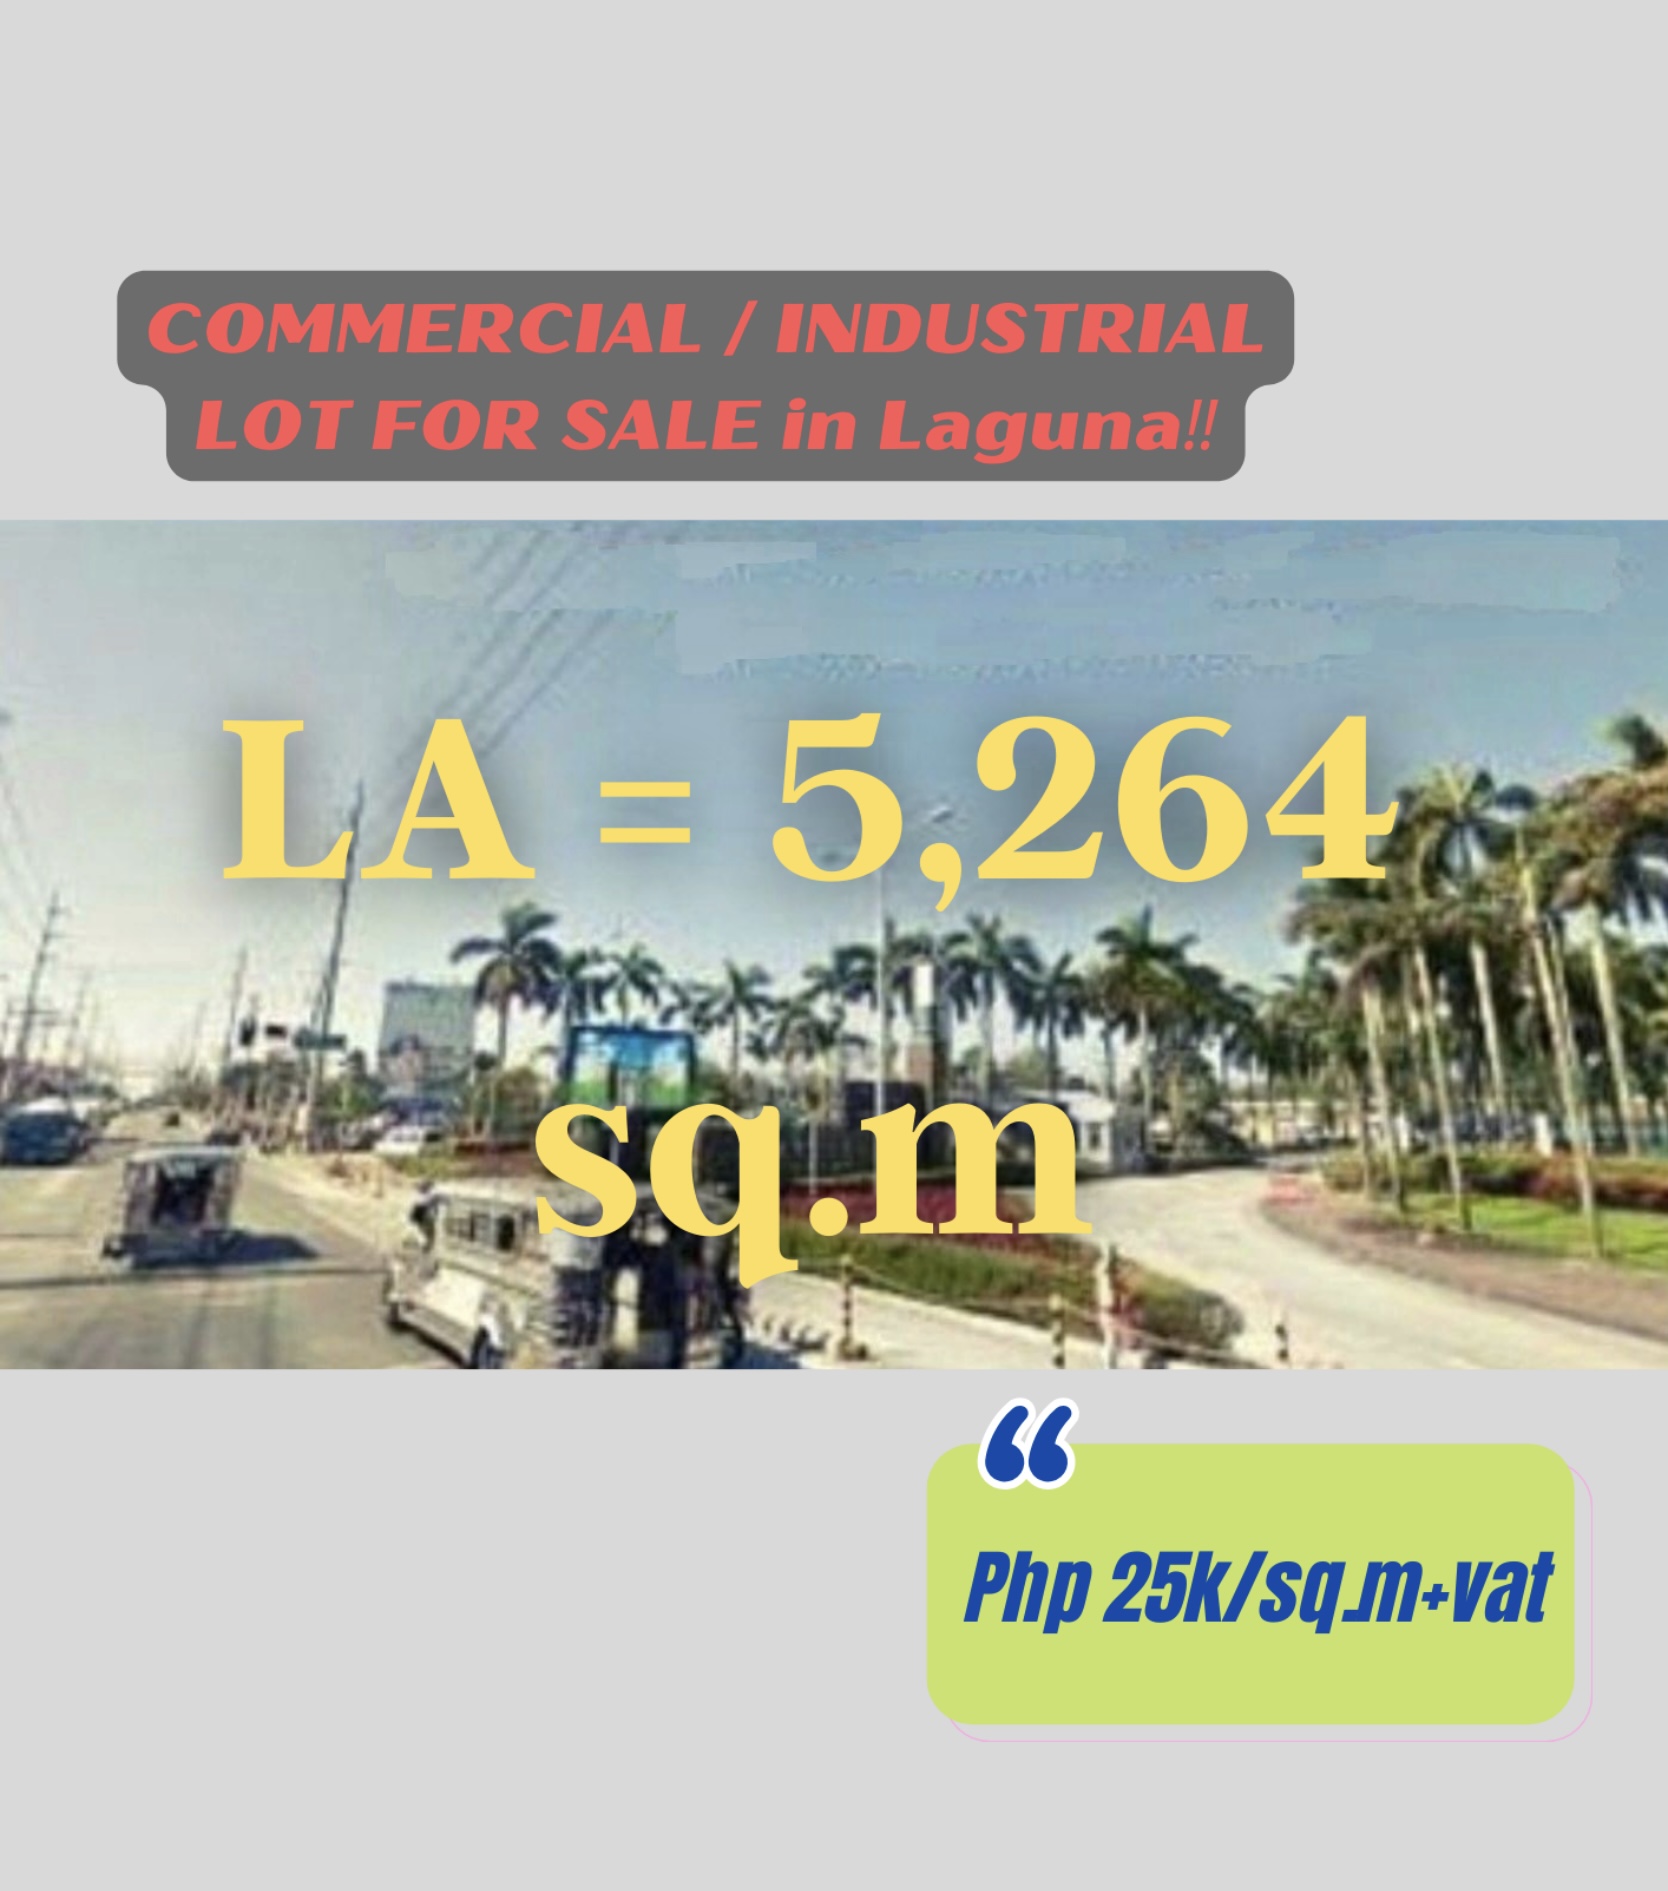 COMMERCIAL / INDUSTRIAL LOT FOR SALE in Laguna‼️